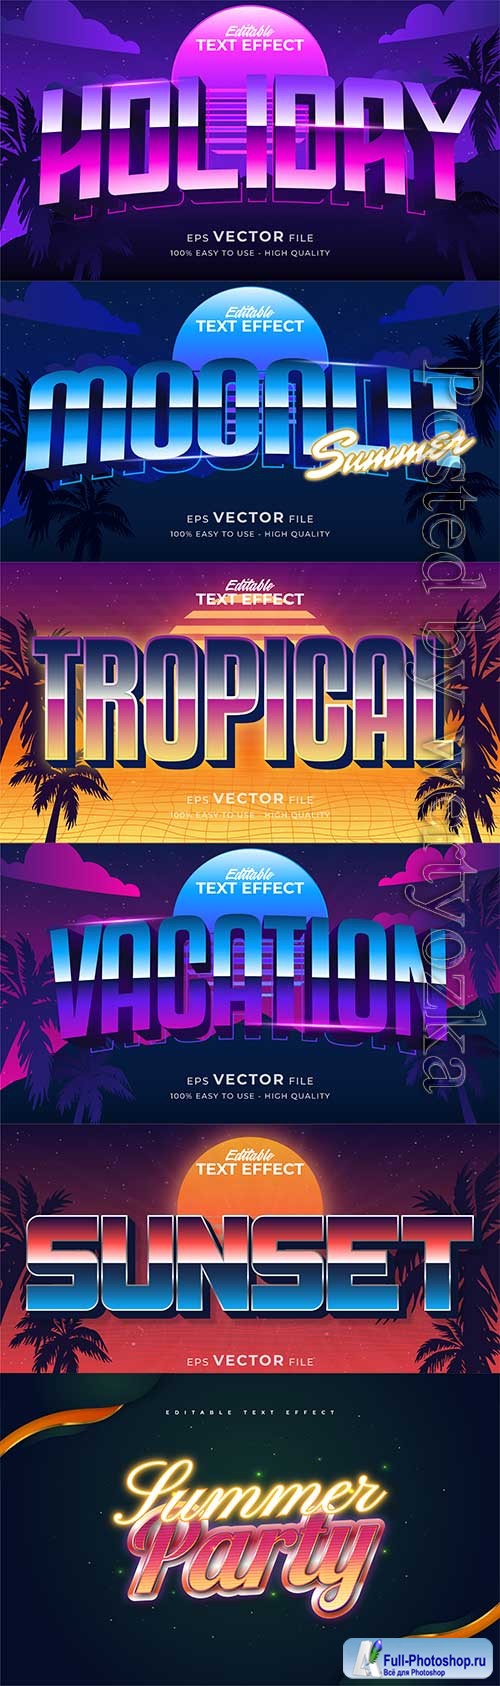 Retro summer holiday text in grunge style theme in vector vol 17